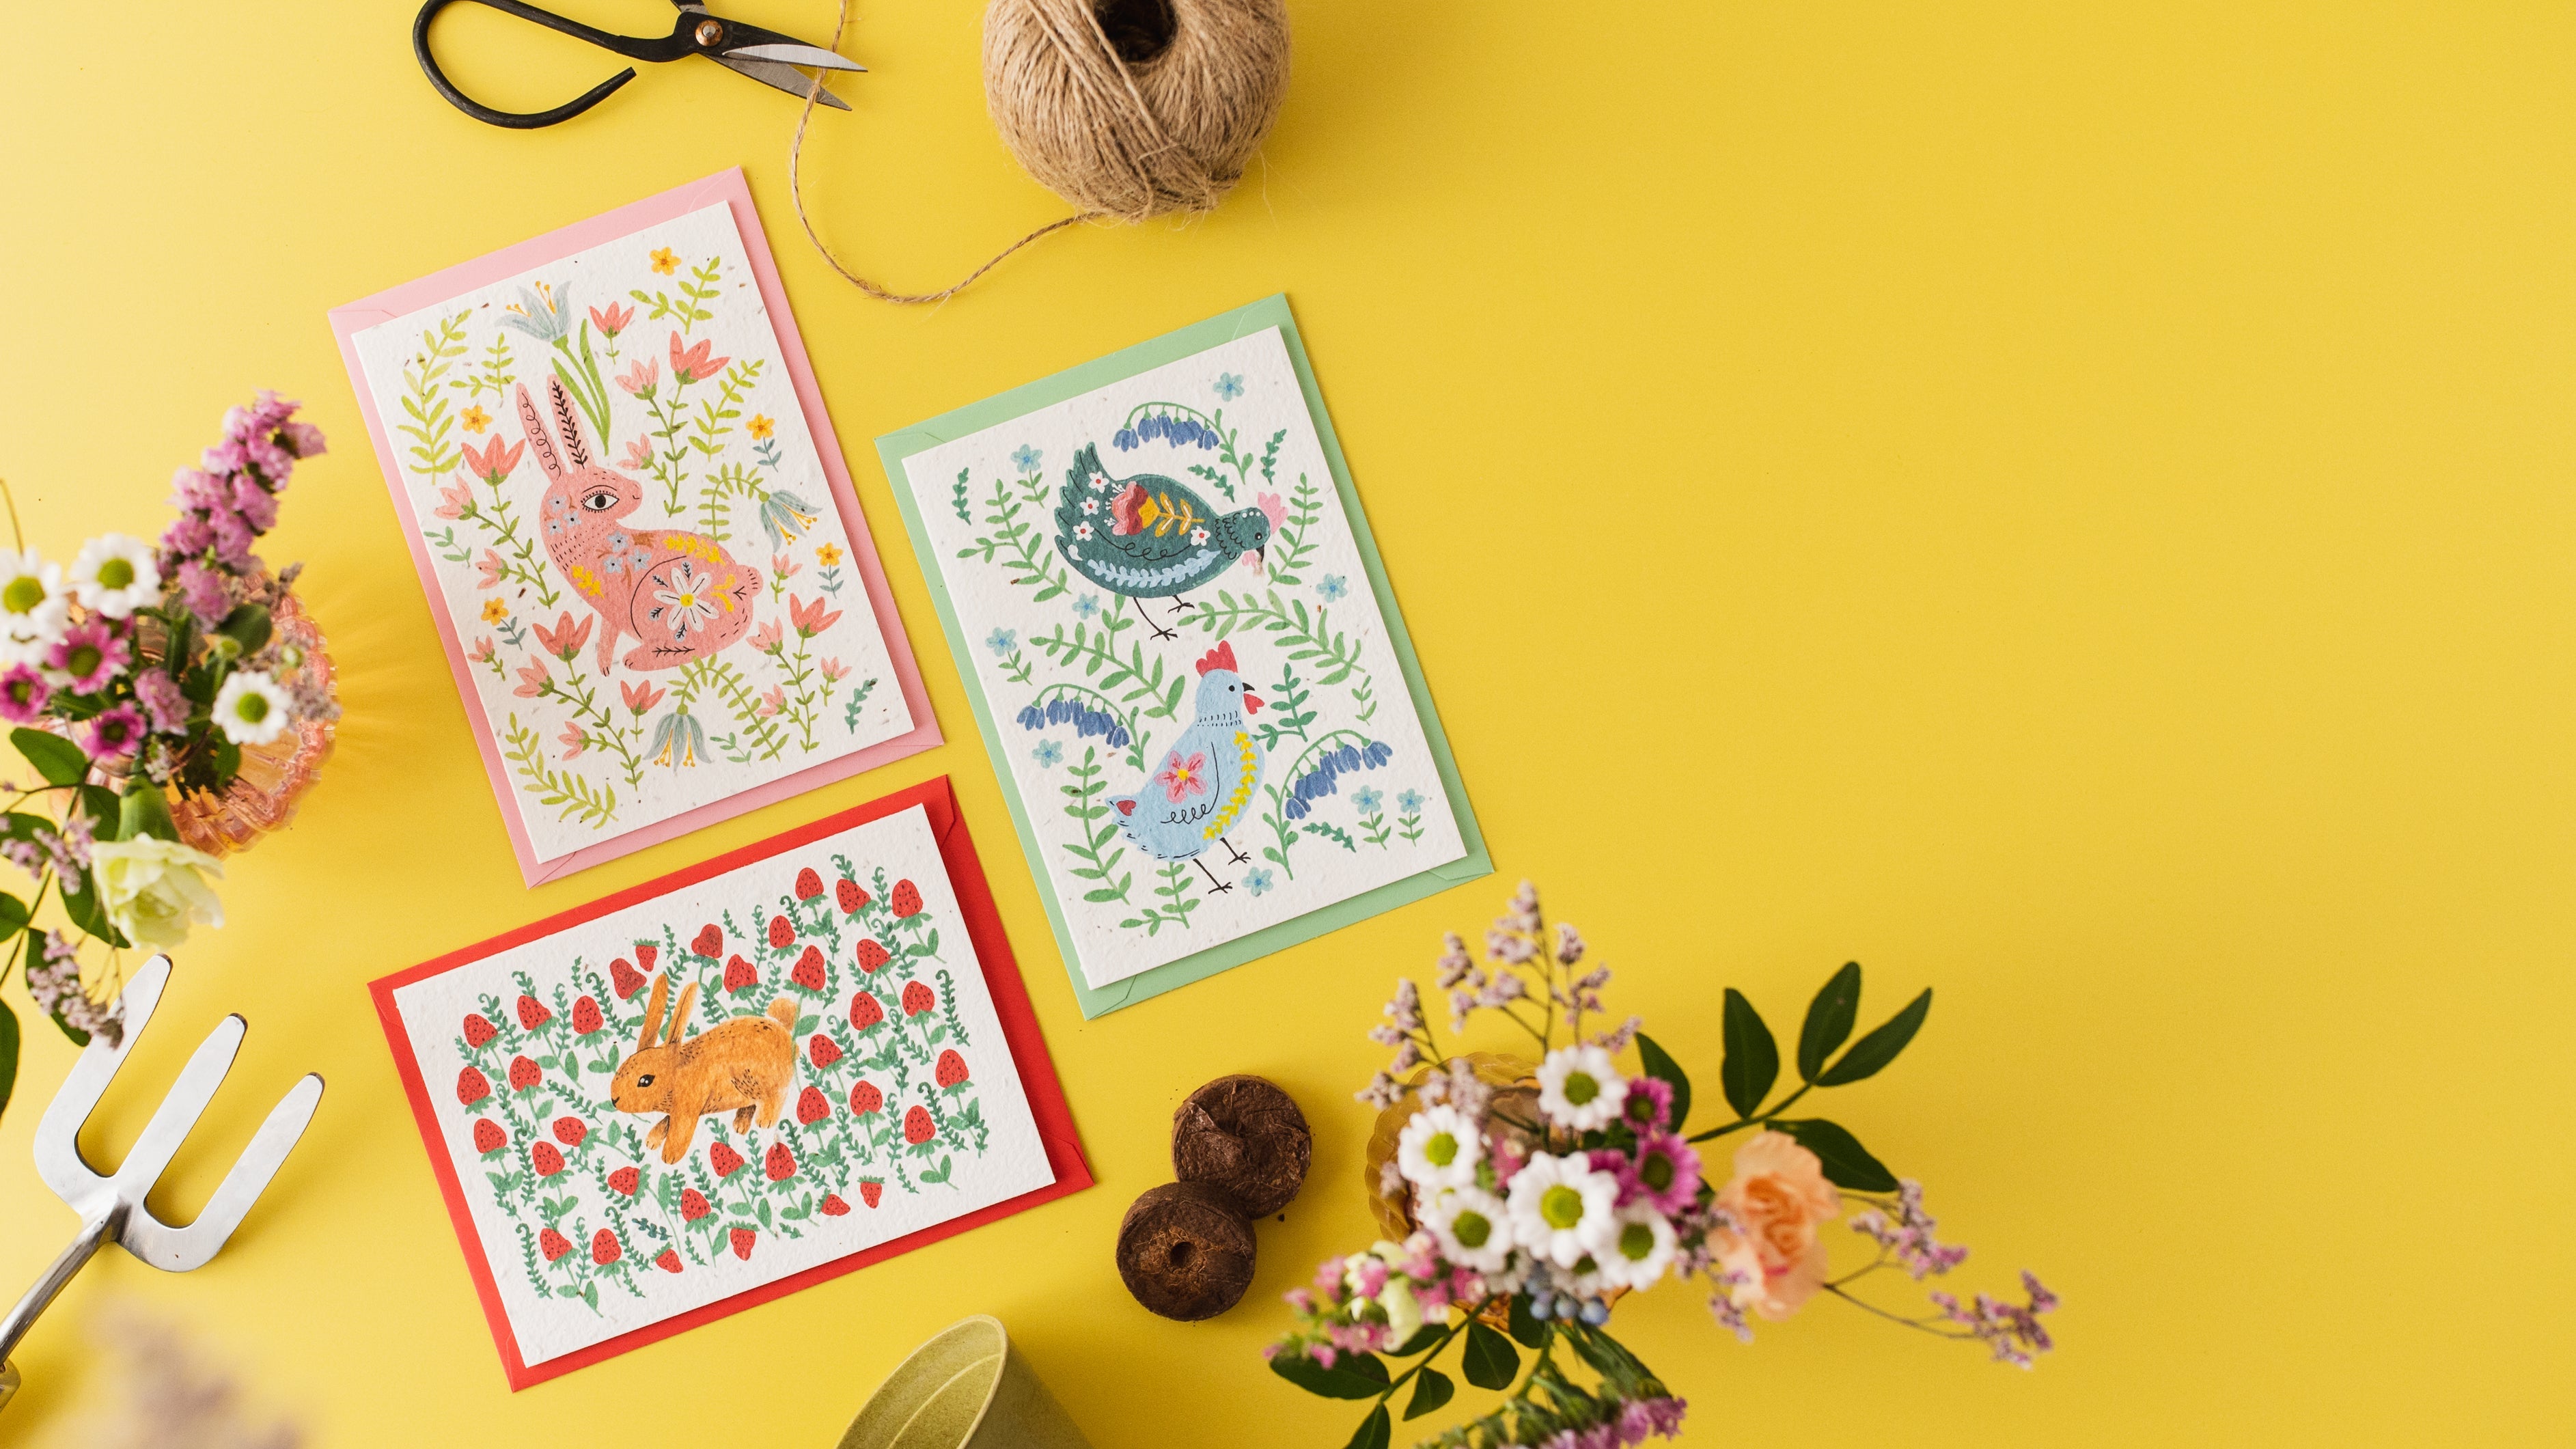 A set of 3 Ruby & Bo plantable cards on a bright yellow background